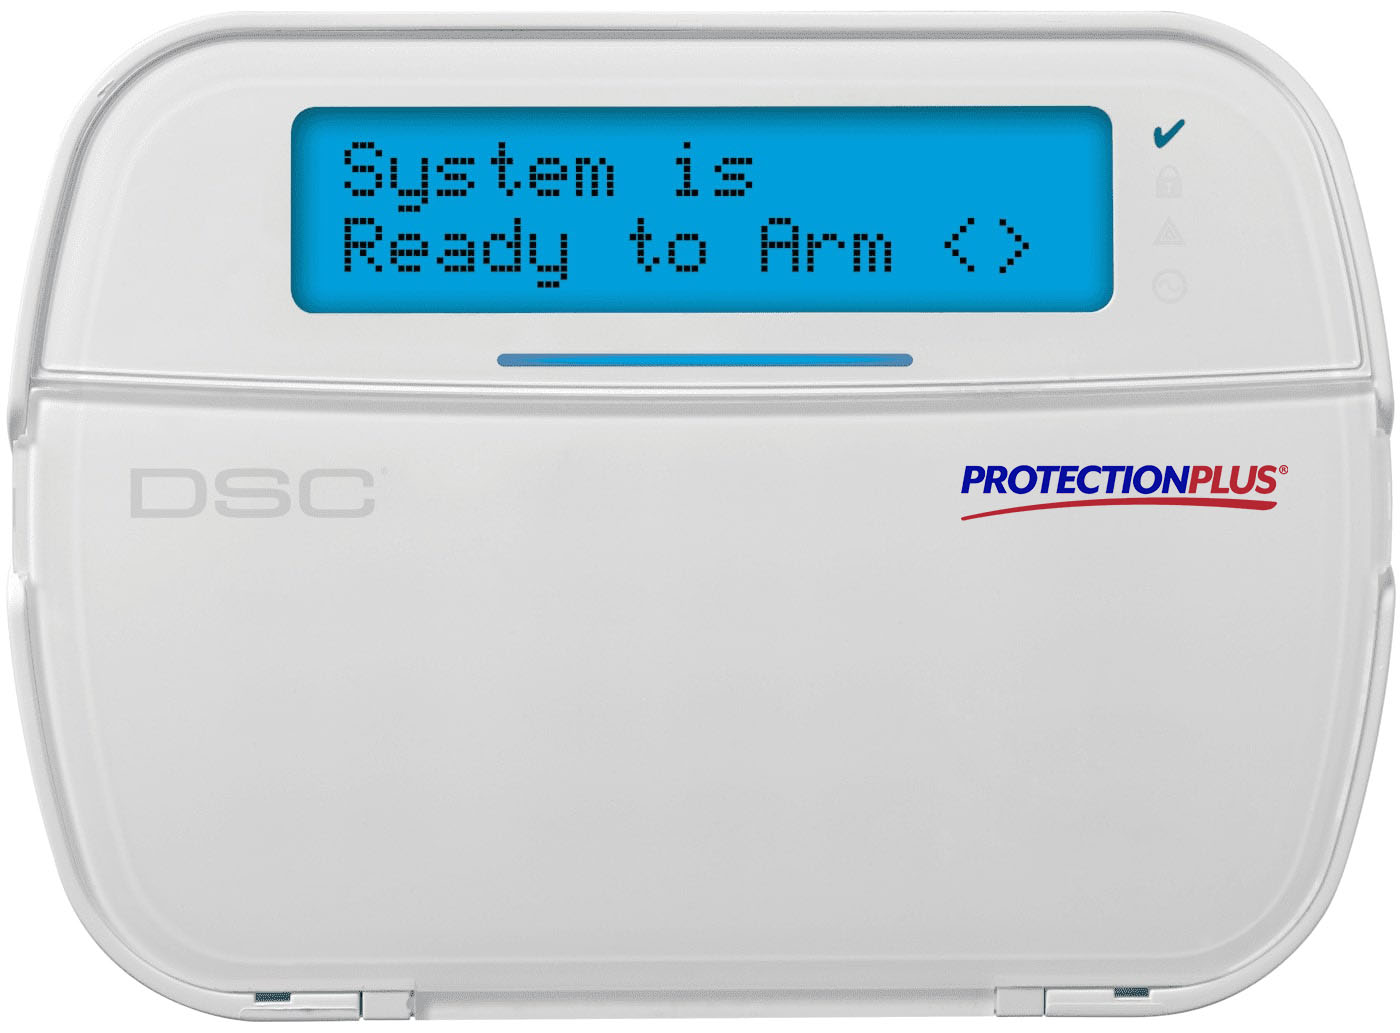 DSC PowerSeries neo From PROTECTION PLUS